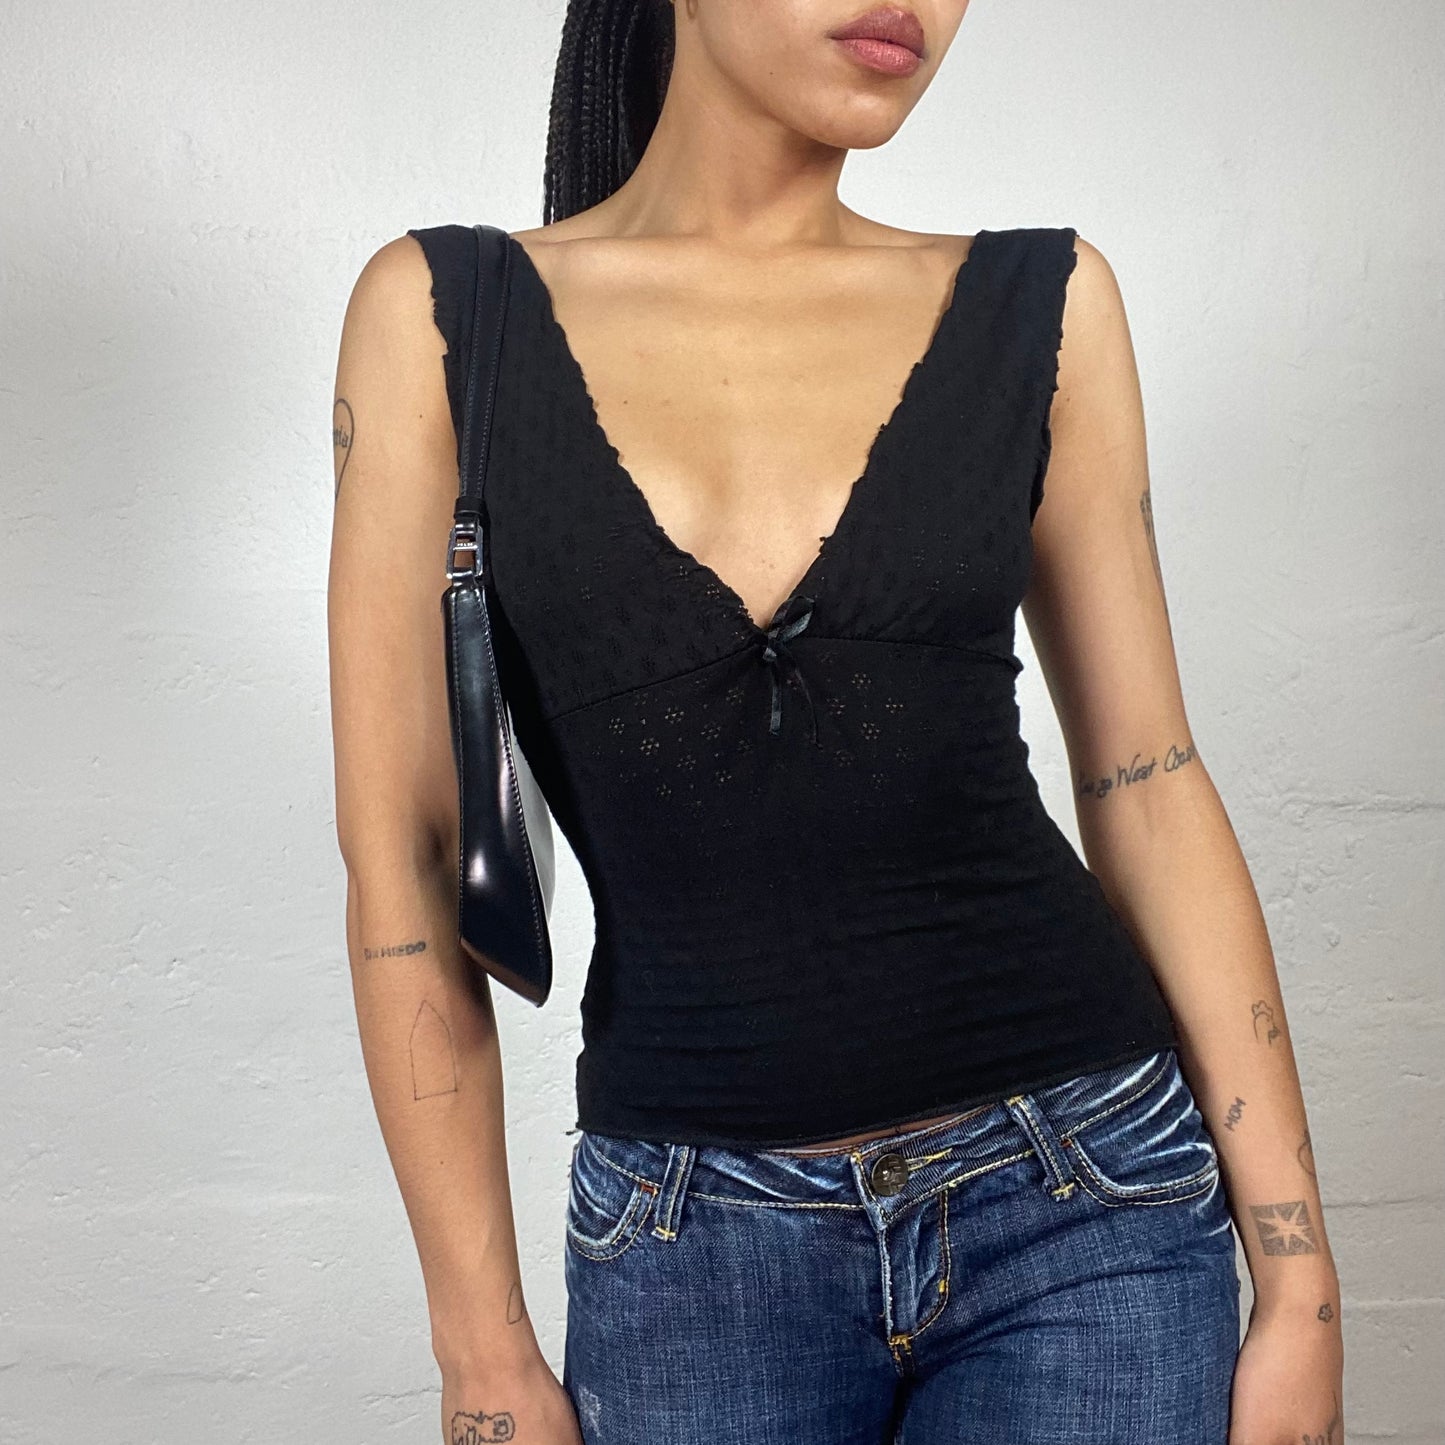 Vintage 2000's Dark Coquette Black Crochet V-Cut Top with Silky Ribbon Detail (S)